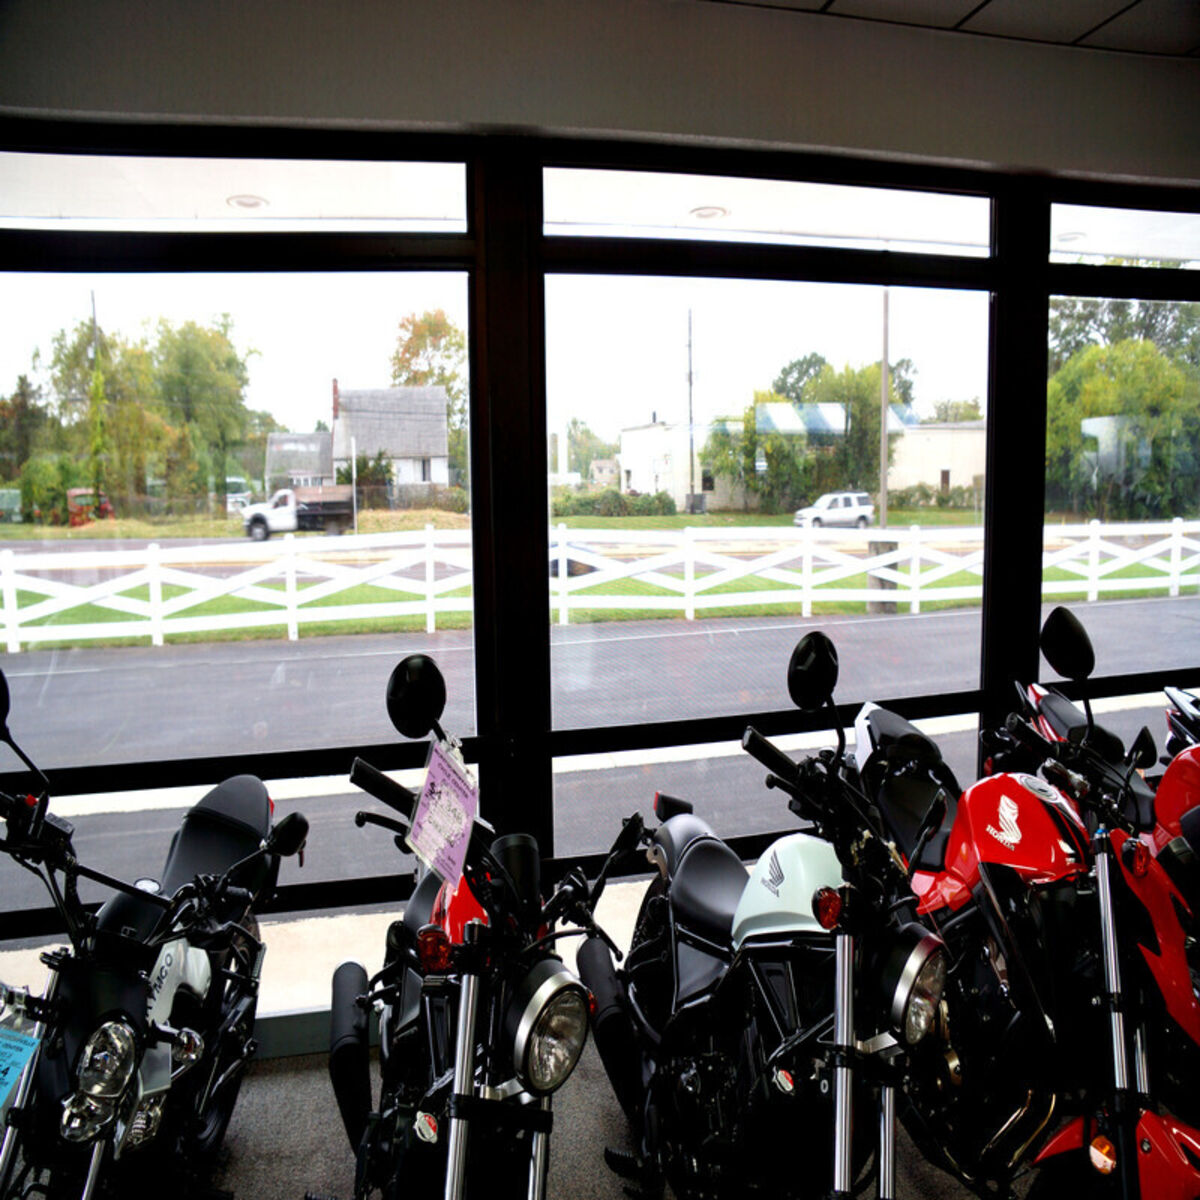 Contra Vision One Way Vision Printed Perforated Film For Motorcycle Shop Windows (Inside View).jpg